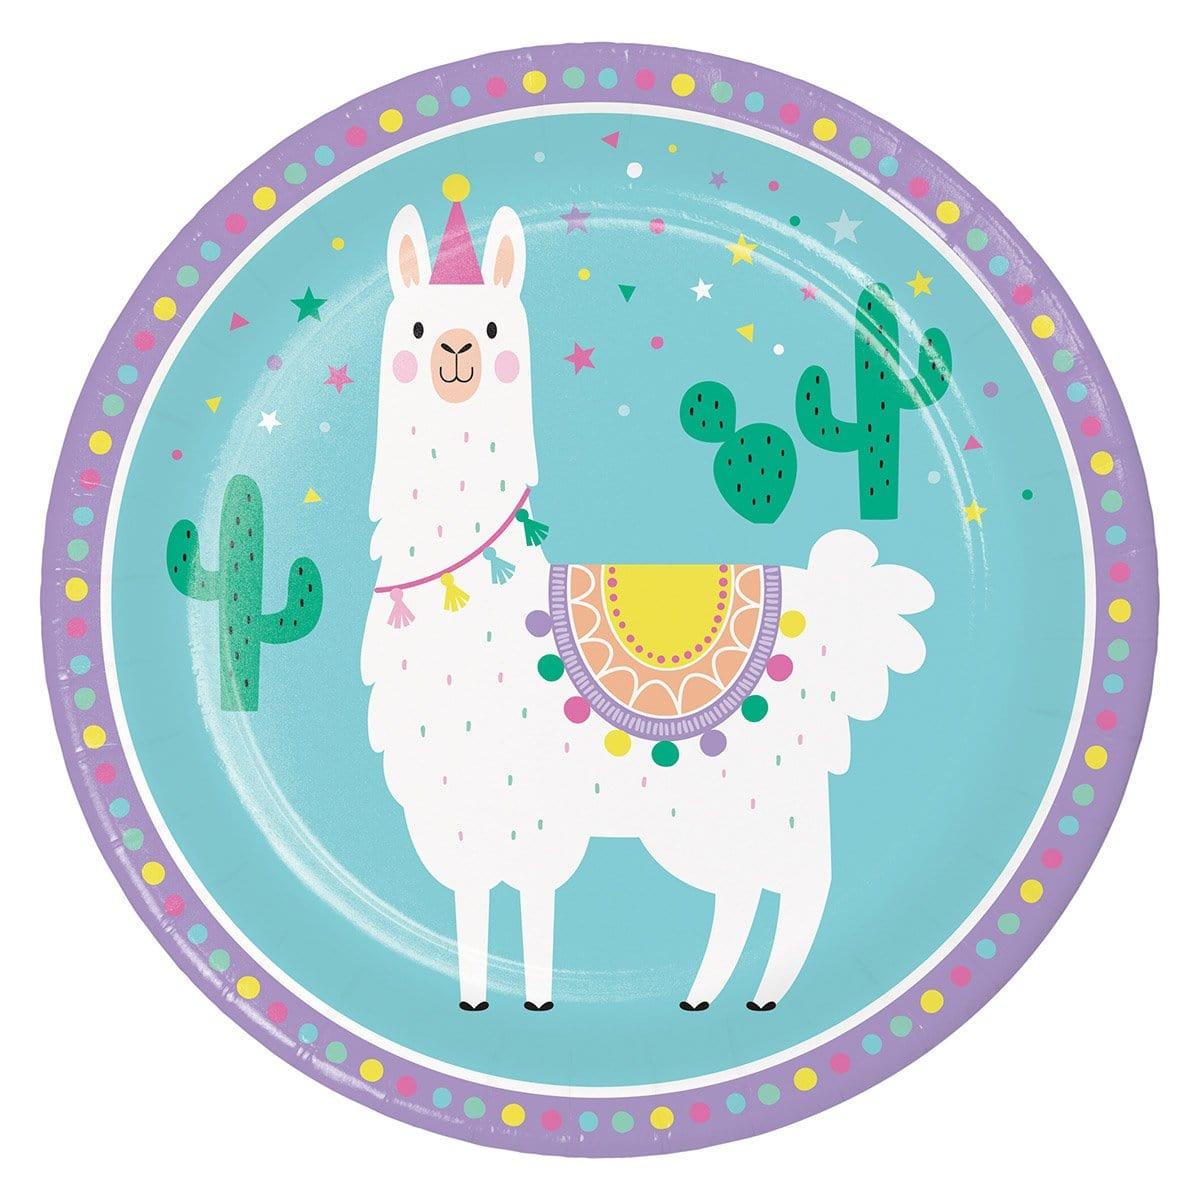 Buy Kids Birthday Llama Party Dinner Plates 9 inches, 8 per package sold at Party Expert